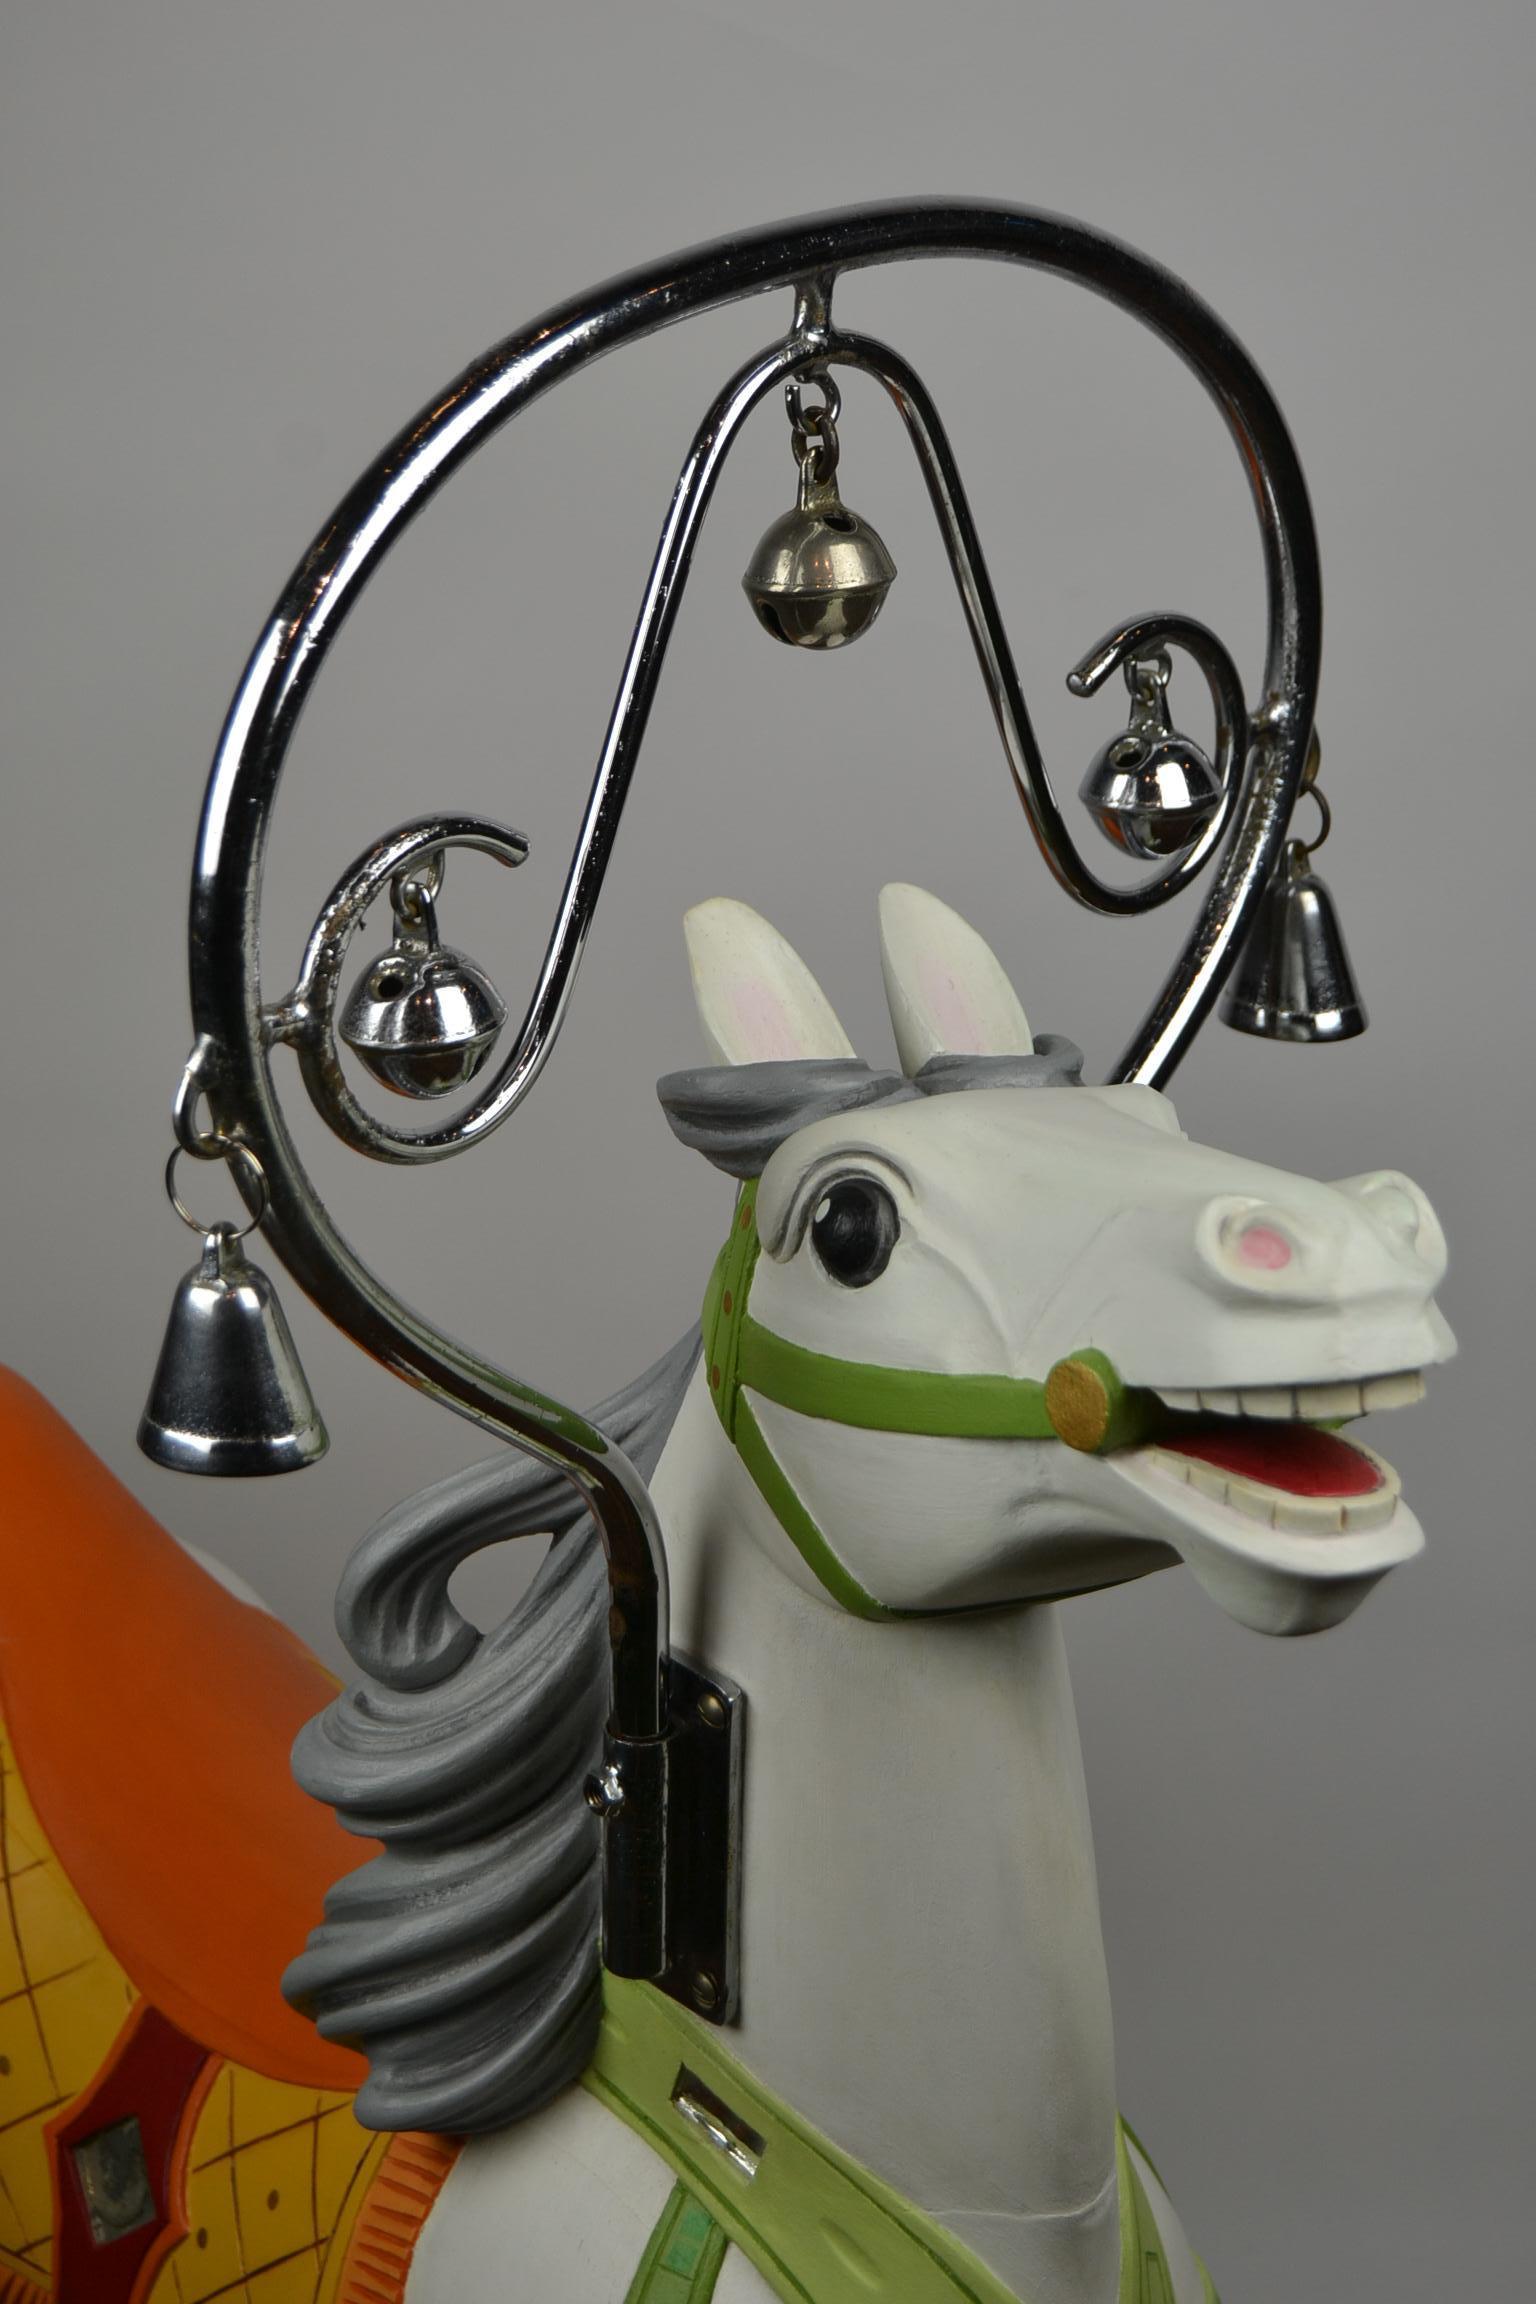 Elegant fairground horse by Bernard Kindt from the 1950s.
This hollow wooden horse was made for a carousel - roundabout - merry-go-round and is now placed on a metal turning base. 

Master sculptor Bernard Kindt was born in 1934 in Herseaux -